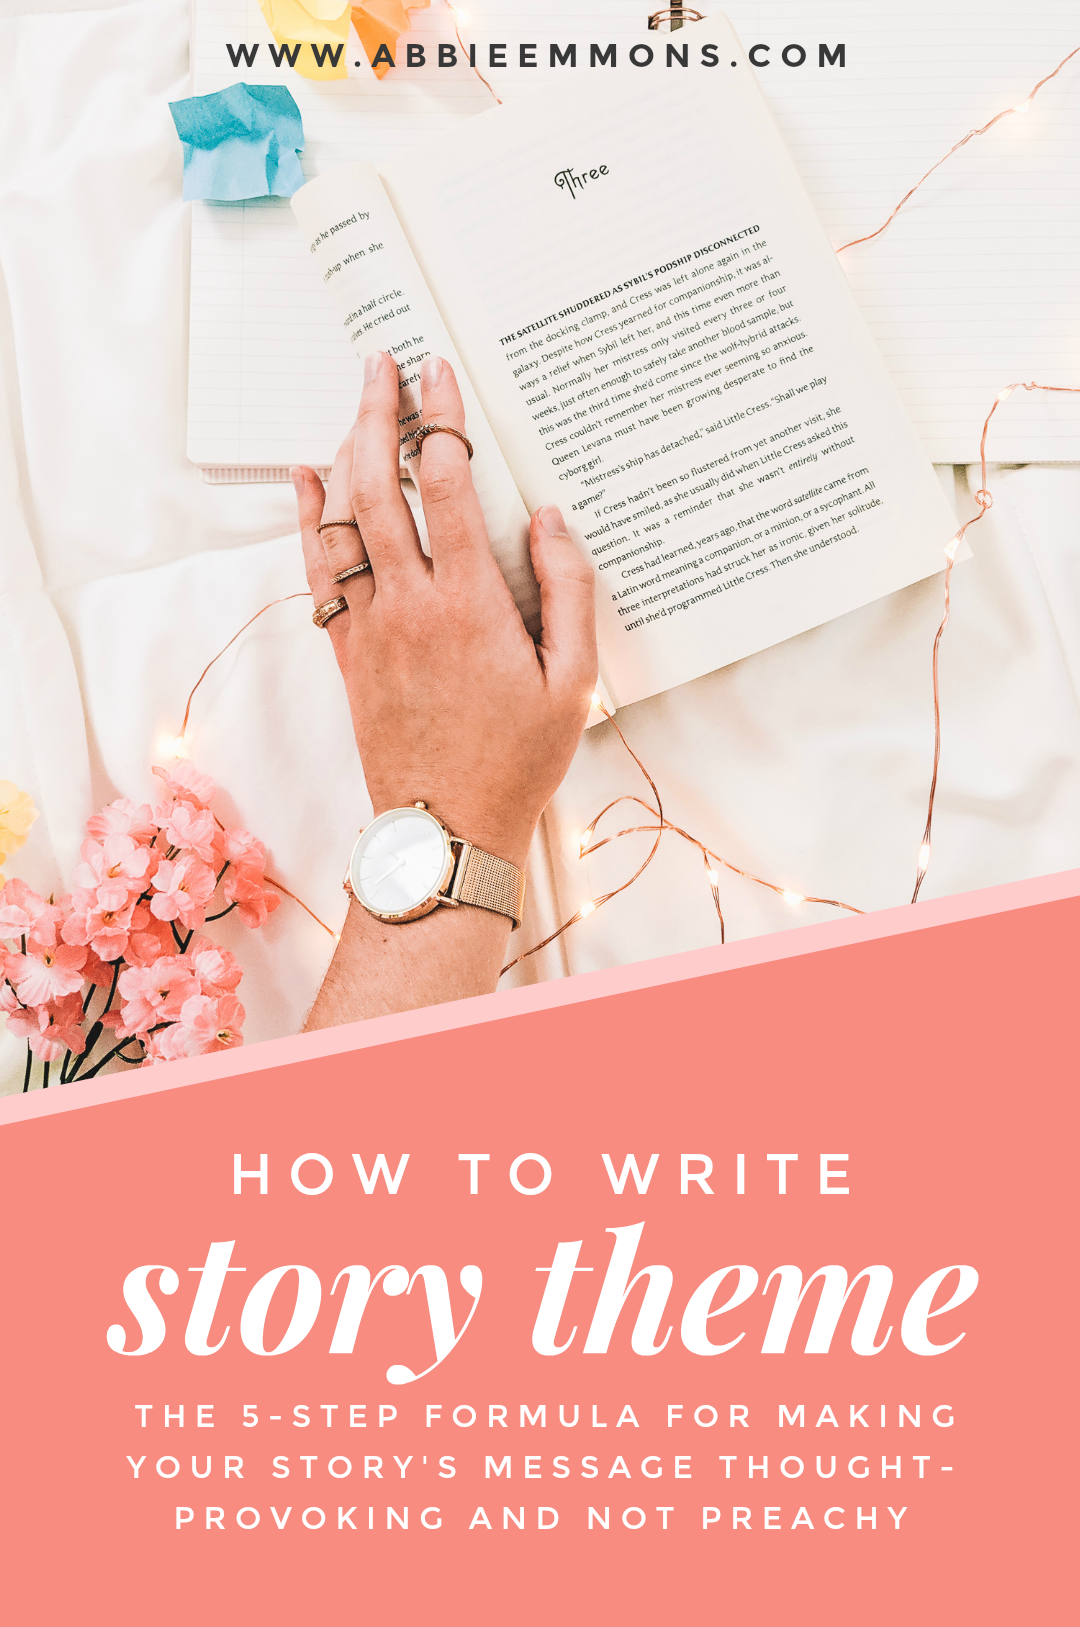 Abbie Emmons - How To Write Theme Into Your Story (Without Being Preachy) picture image